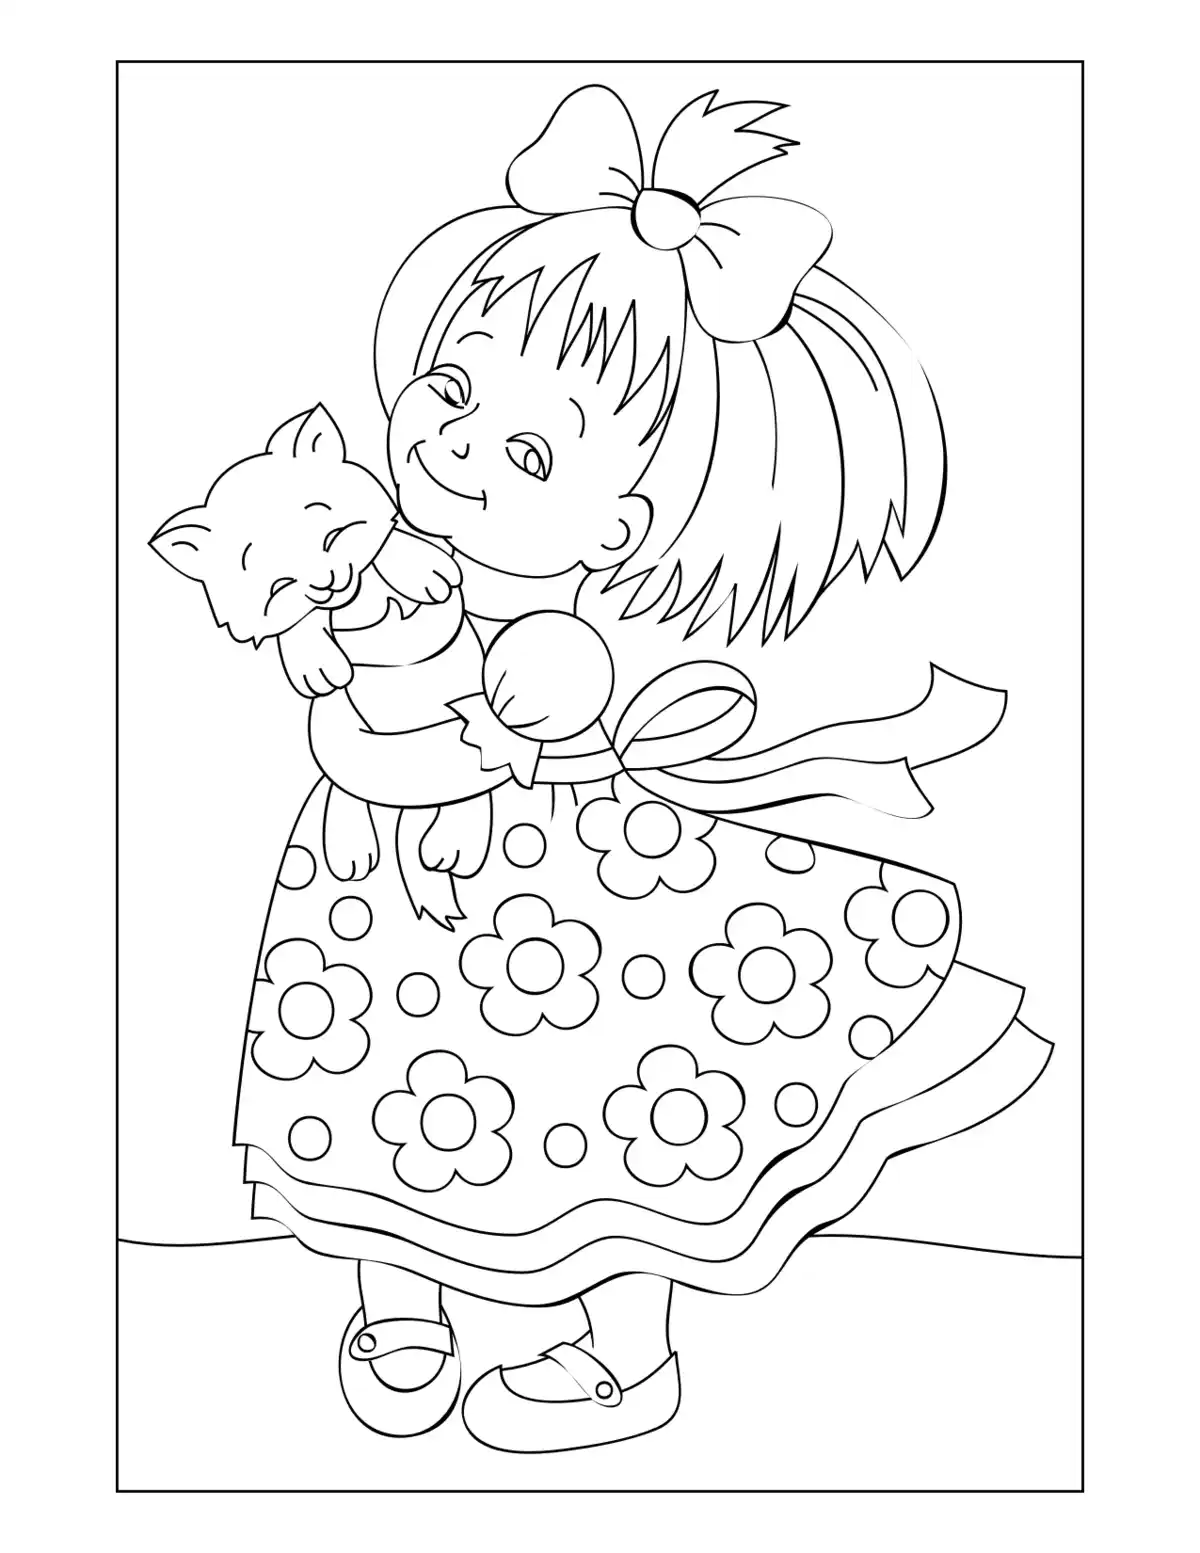 Free Coloring Pages PDF, Farm Little Girl With Kitten Cat Coloring Pages Pdf